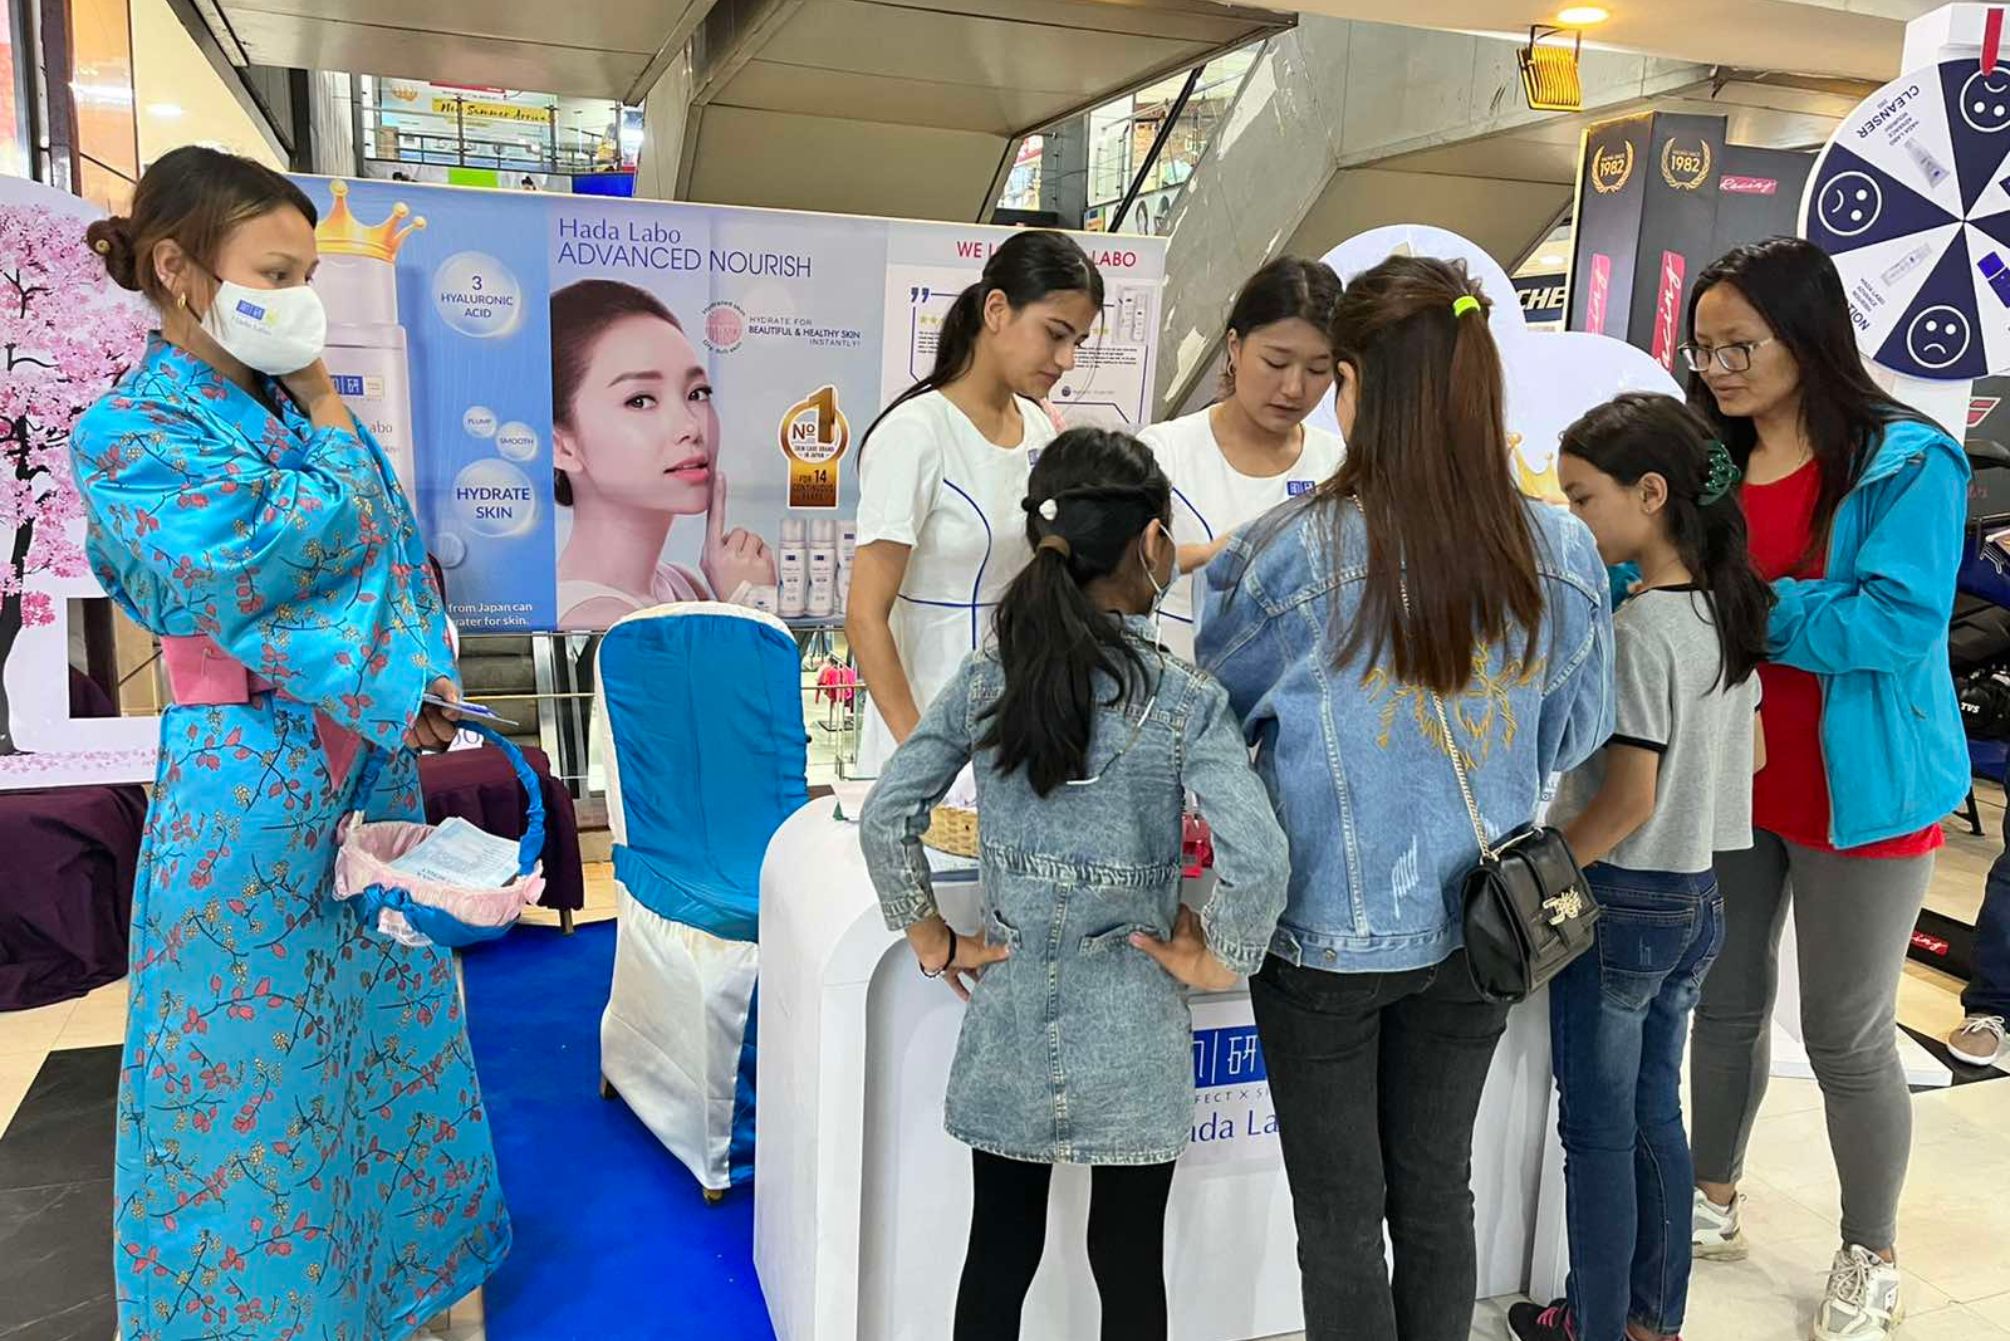 No.1 Skincare brand Hada Labo from Japan – Product Trial, Free samples, exciting fun, and games at malls and supermarkets